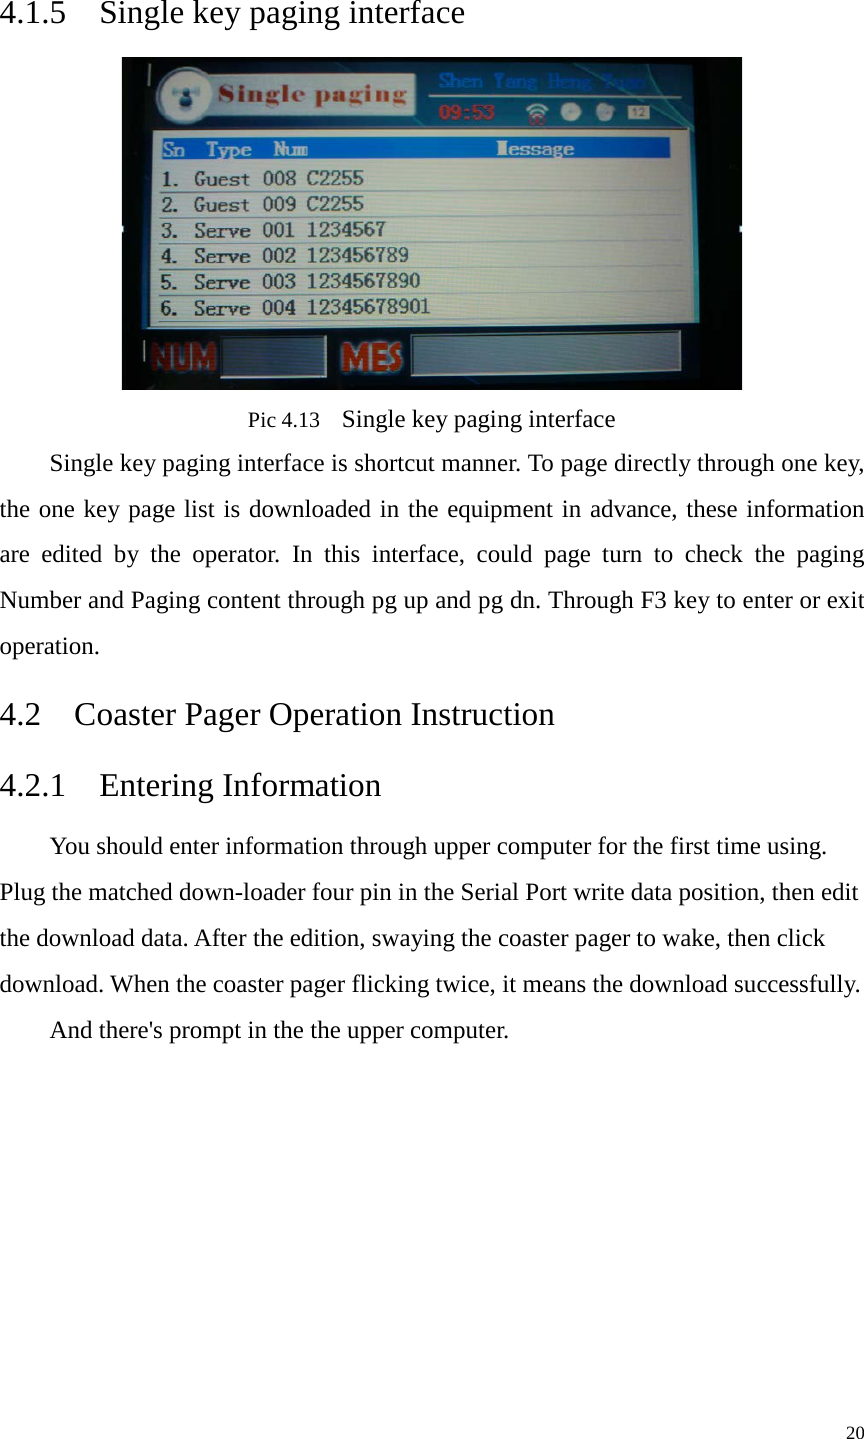    4.1.5  Single key paging interface  Pic 4.13  Single key paging interface Single key paging interface is shortcut manner. To page directly through one key, the one key page list is downloaded in the equipment in advance, these information are edited by the operator. In this interface, could page turn to check the paging Number and Paging content through pg up and pg dn. Through F3 key to enter or exit operation.   4.2  Coaster Pager Operation Instruction   4.2.1  Entering Information You should enter information through upper computer for the first time using. Plug the matched down-loader four pin in the Serial Port write data position, then edit the download data. After the edition, swaying the coaster pager to wake, then click download. When the coaster pager flicking twice, it means the download successfully.   And there&apos;s prompt in the the upper computer.         20 